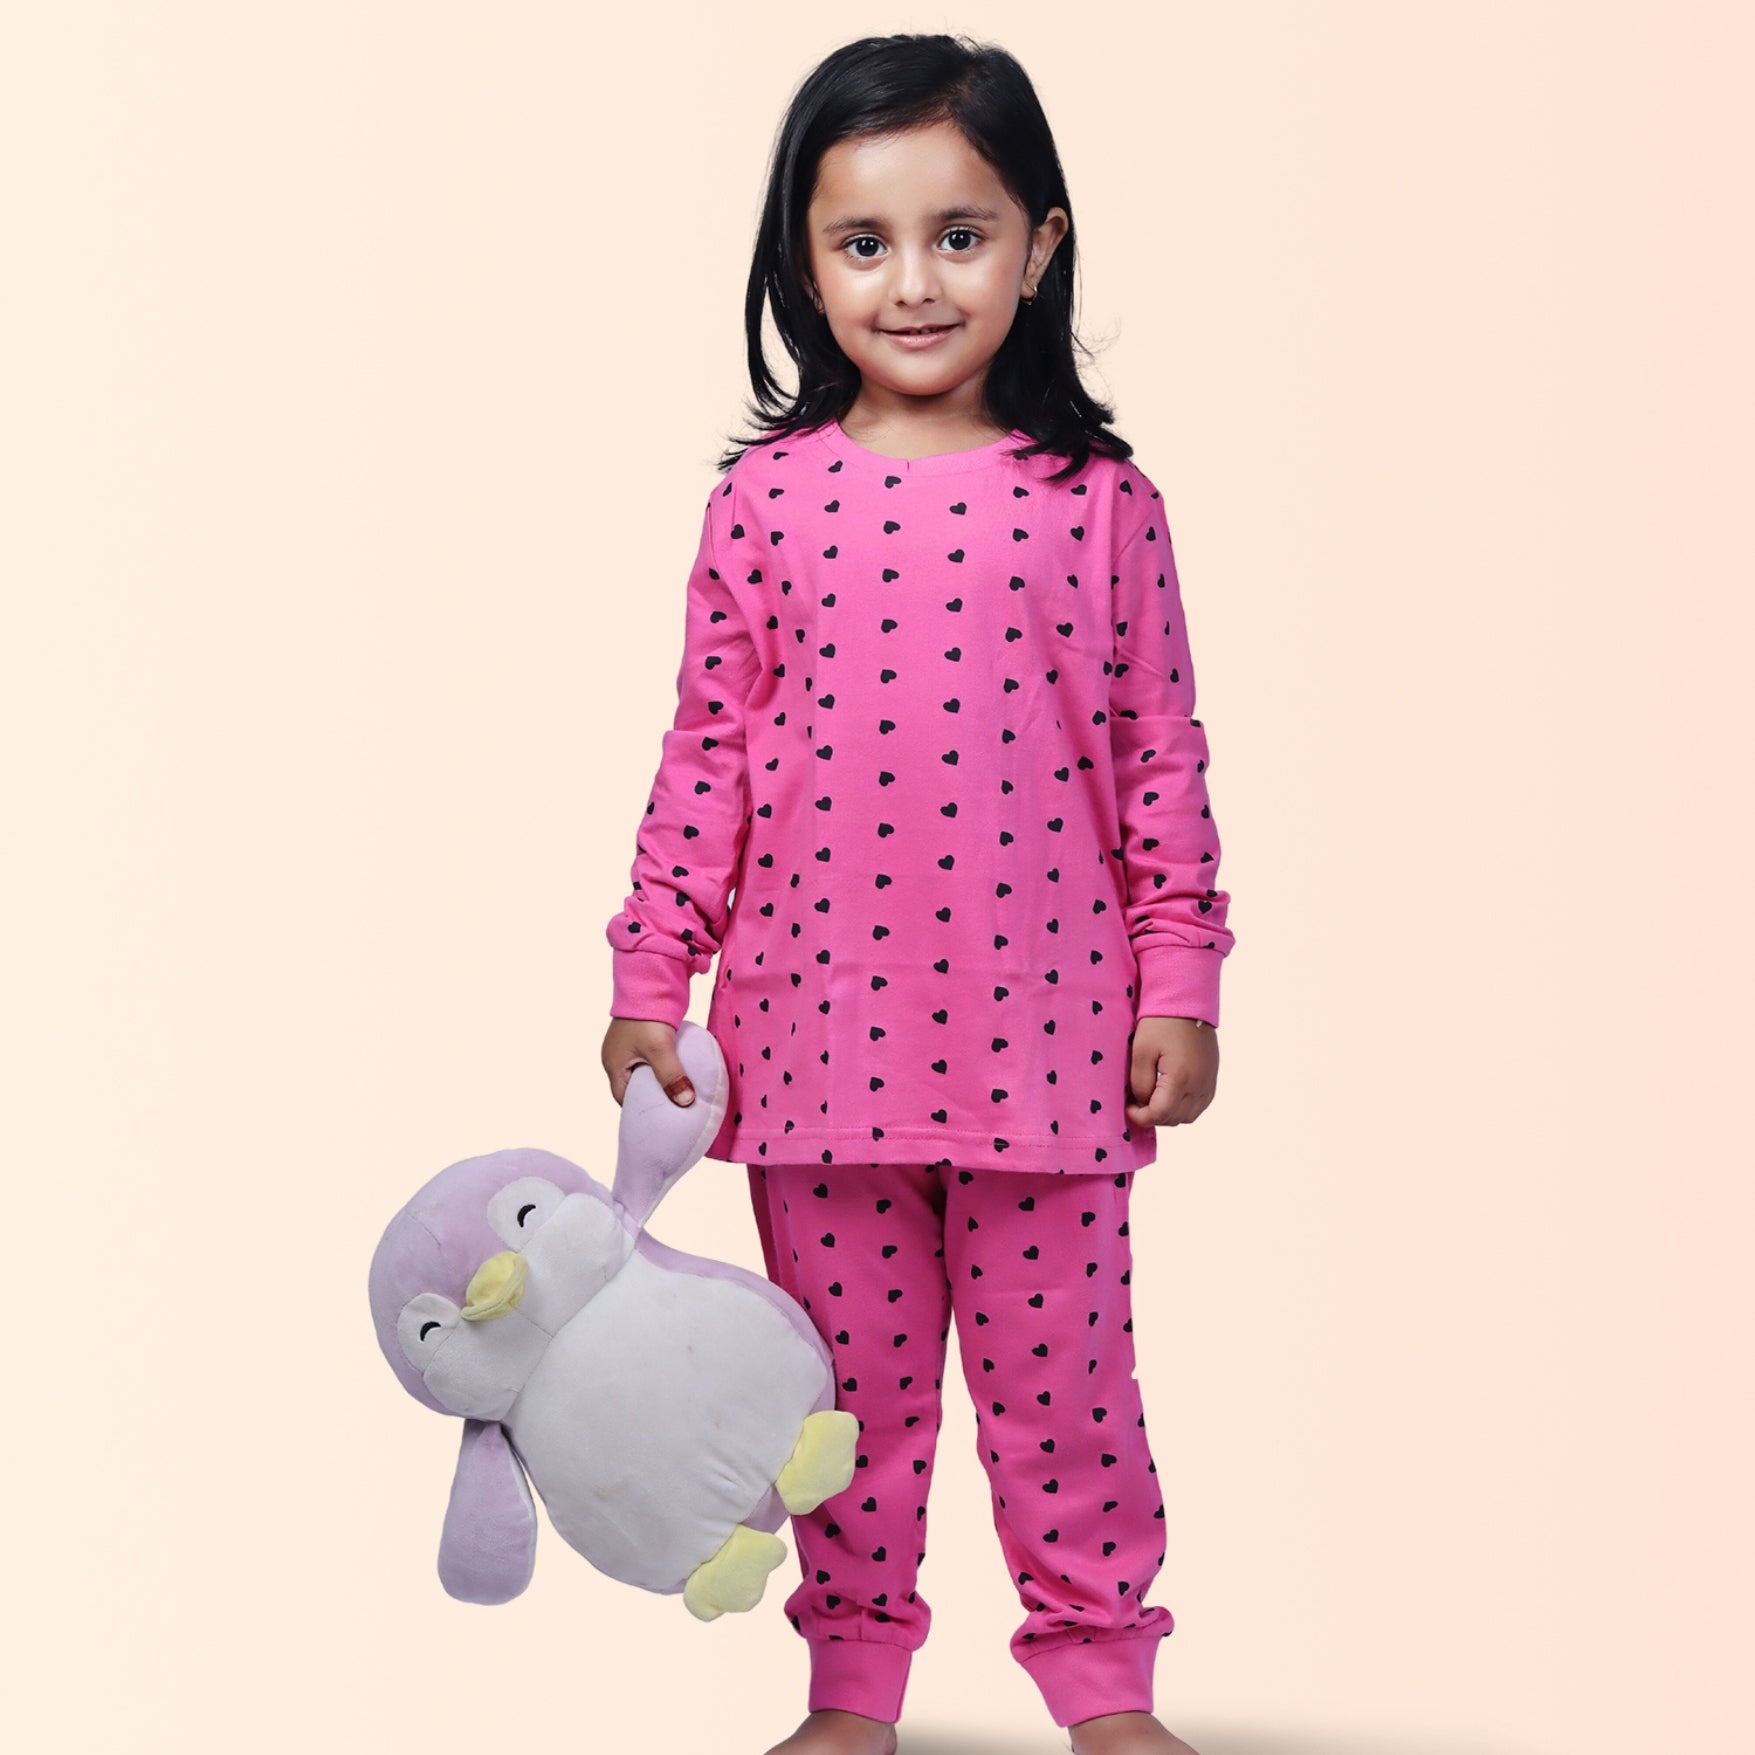 Full Sleeve Night Suit For Girl In Pink Colour - Black Hearts